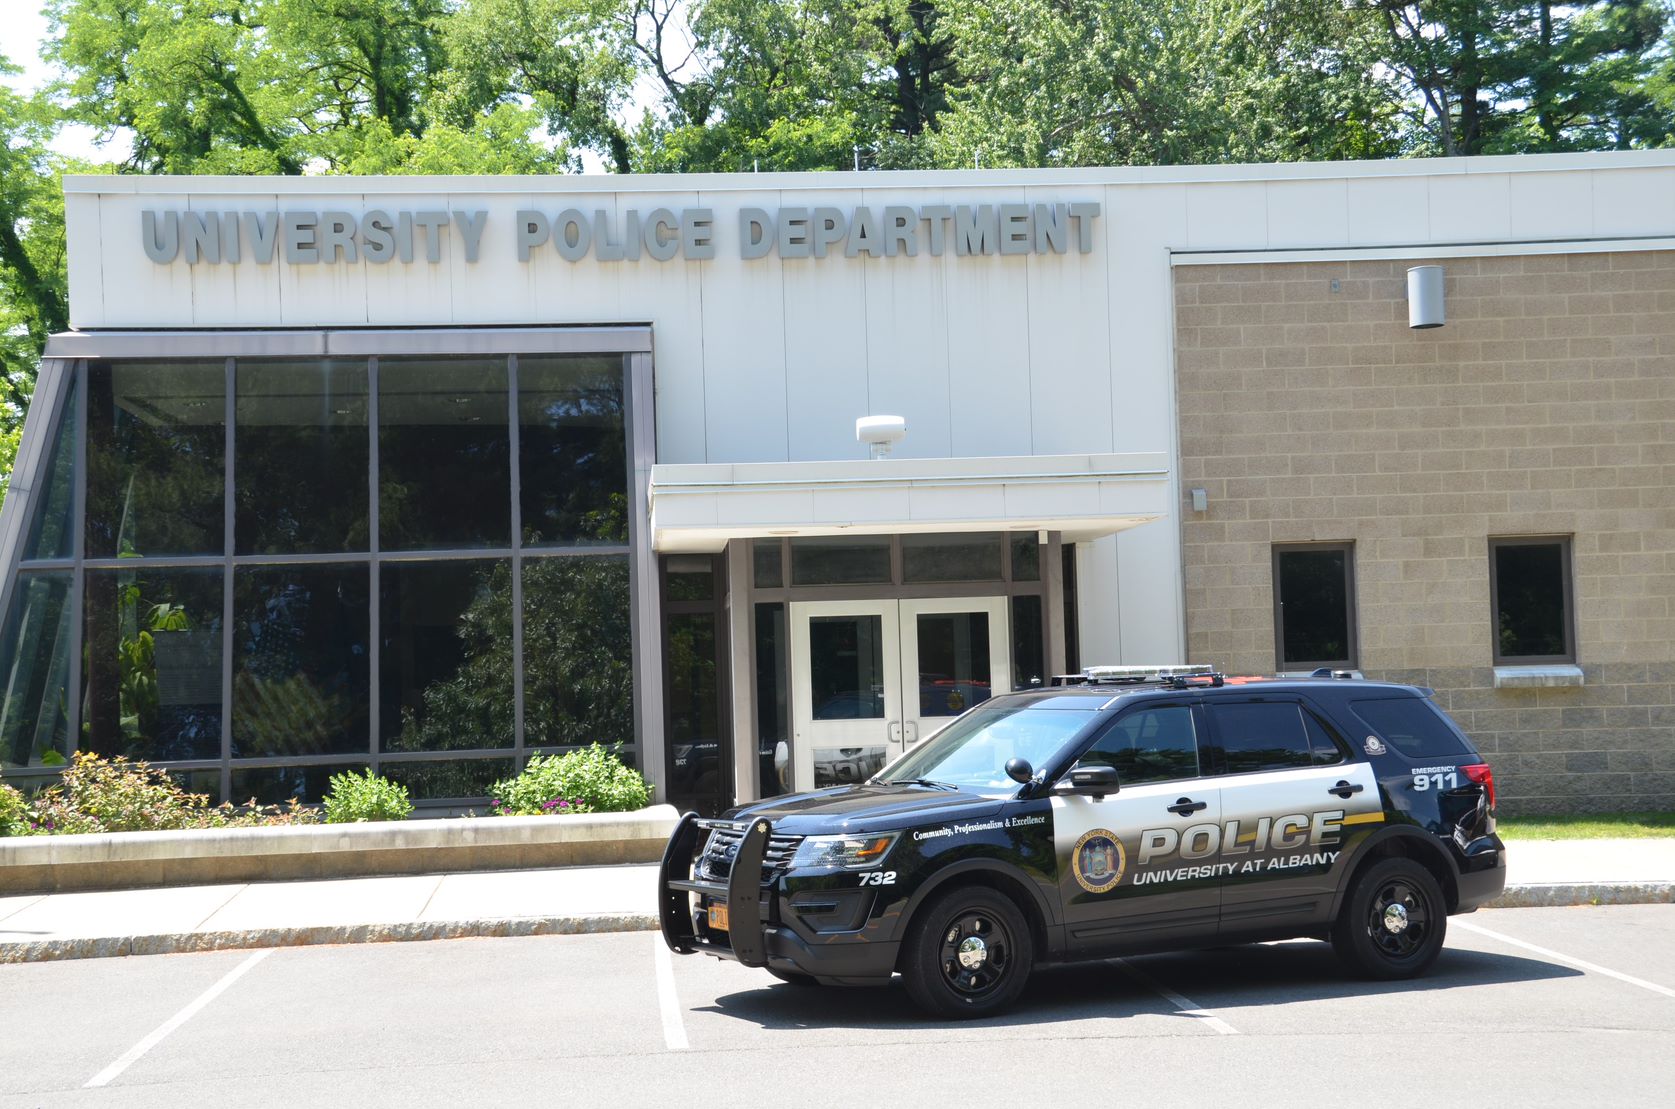 university police department building and patrol cars